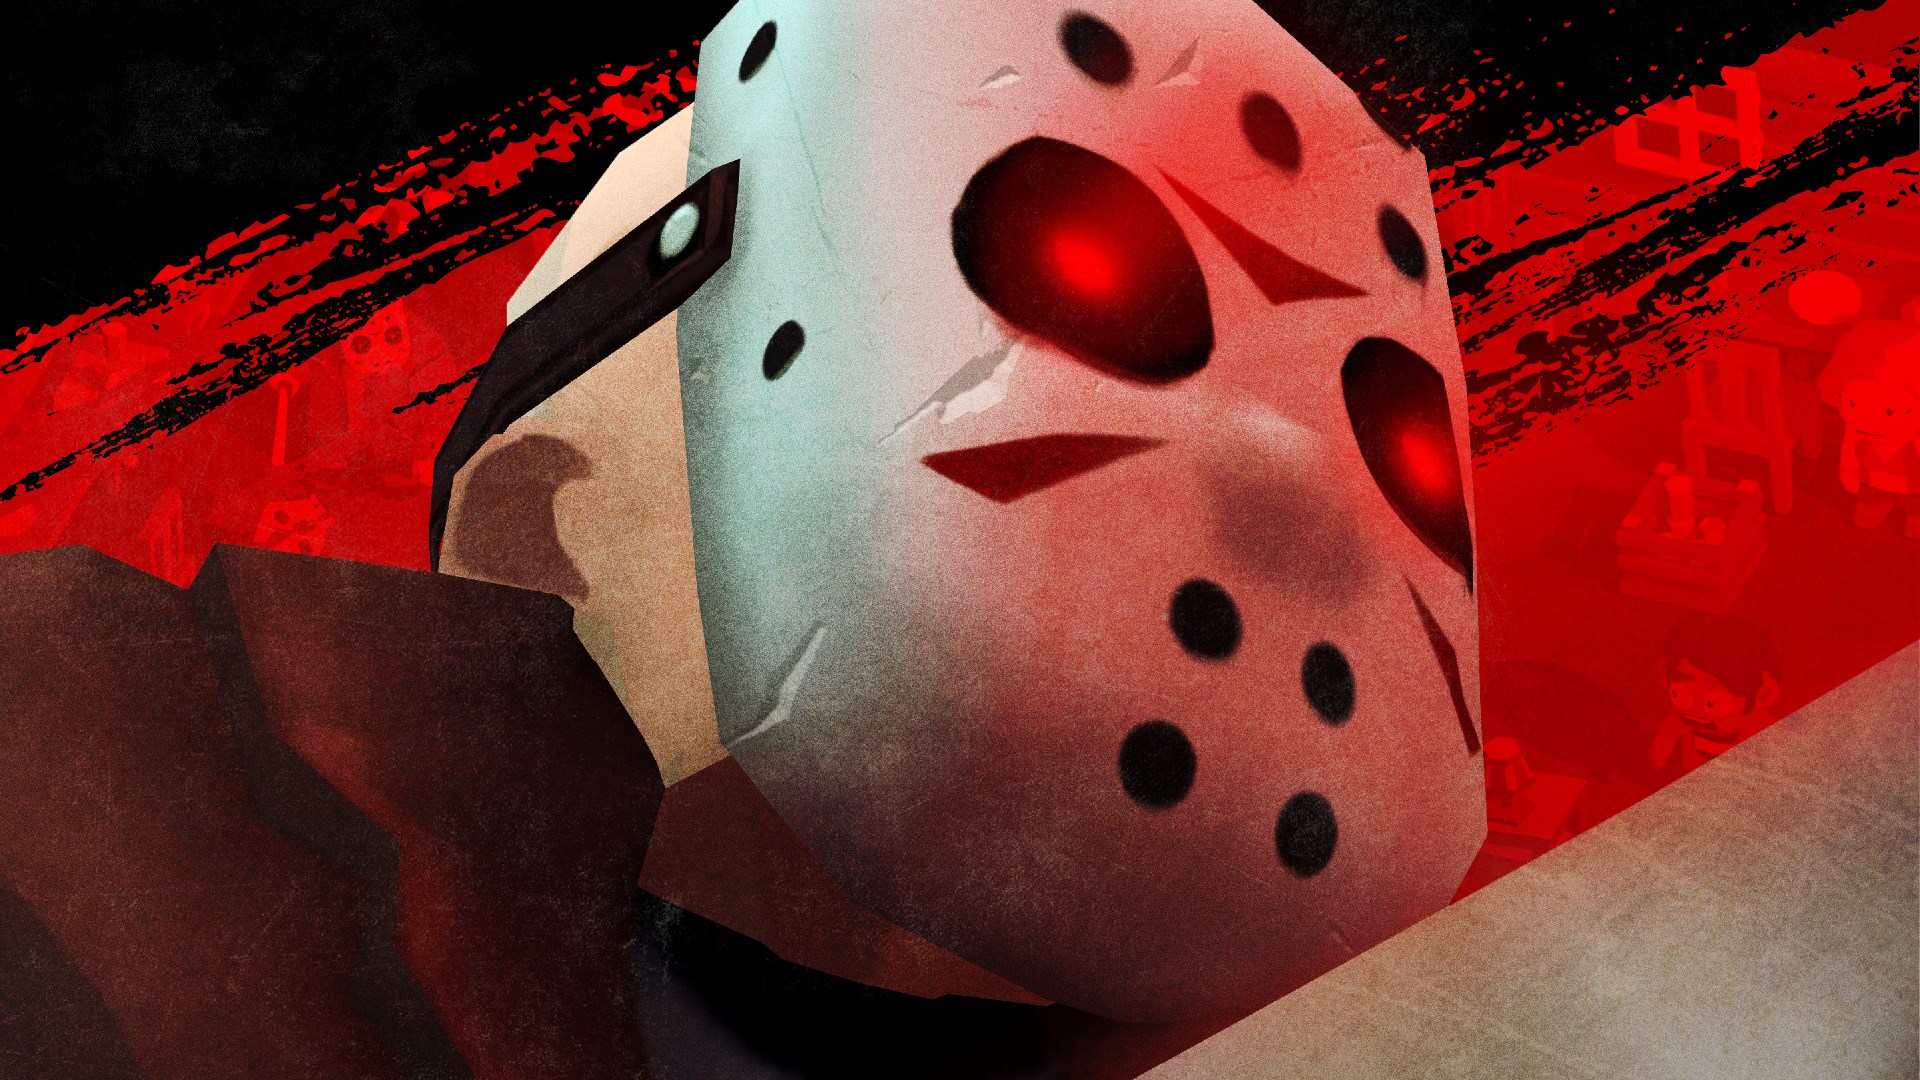 Friday the 13th mac download free version